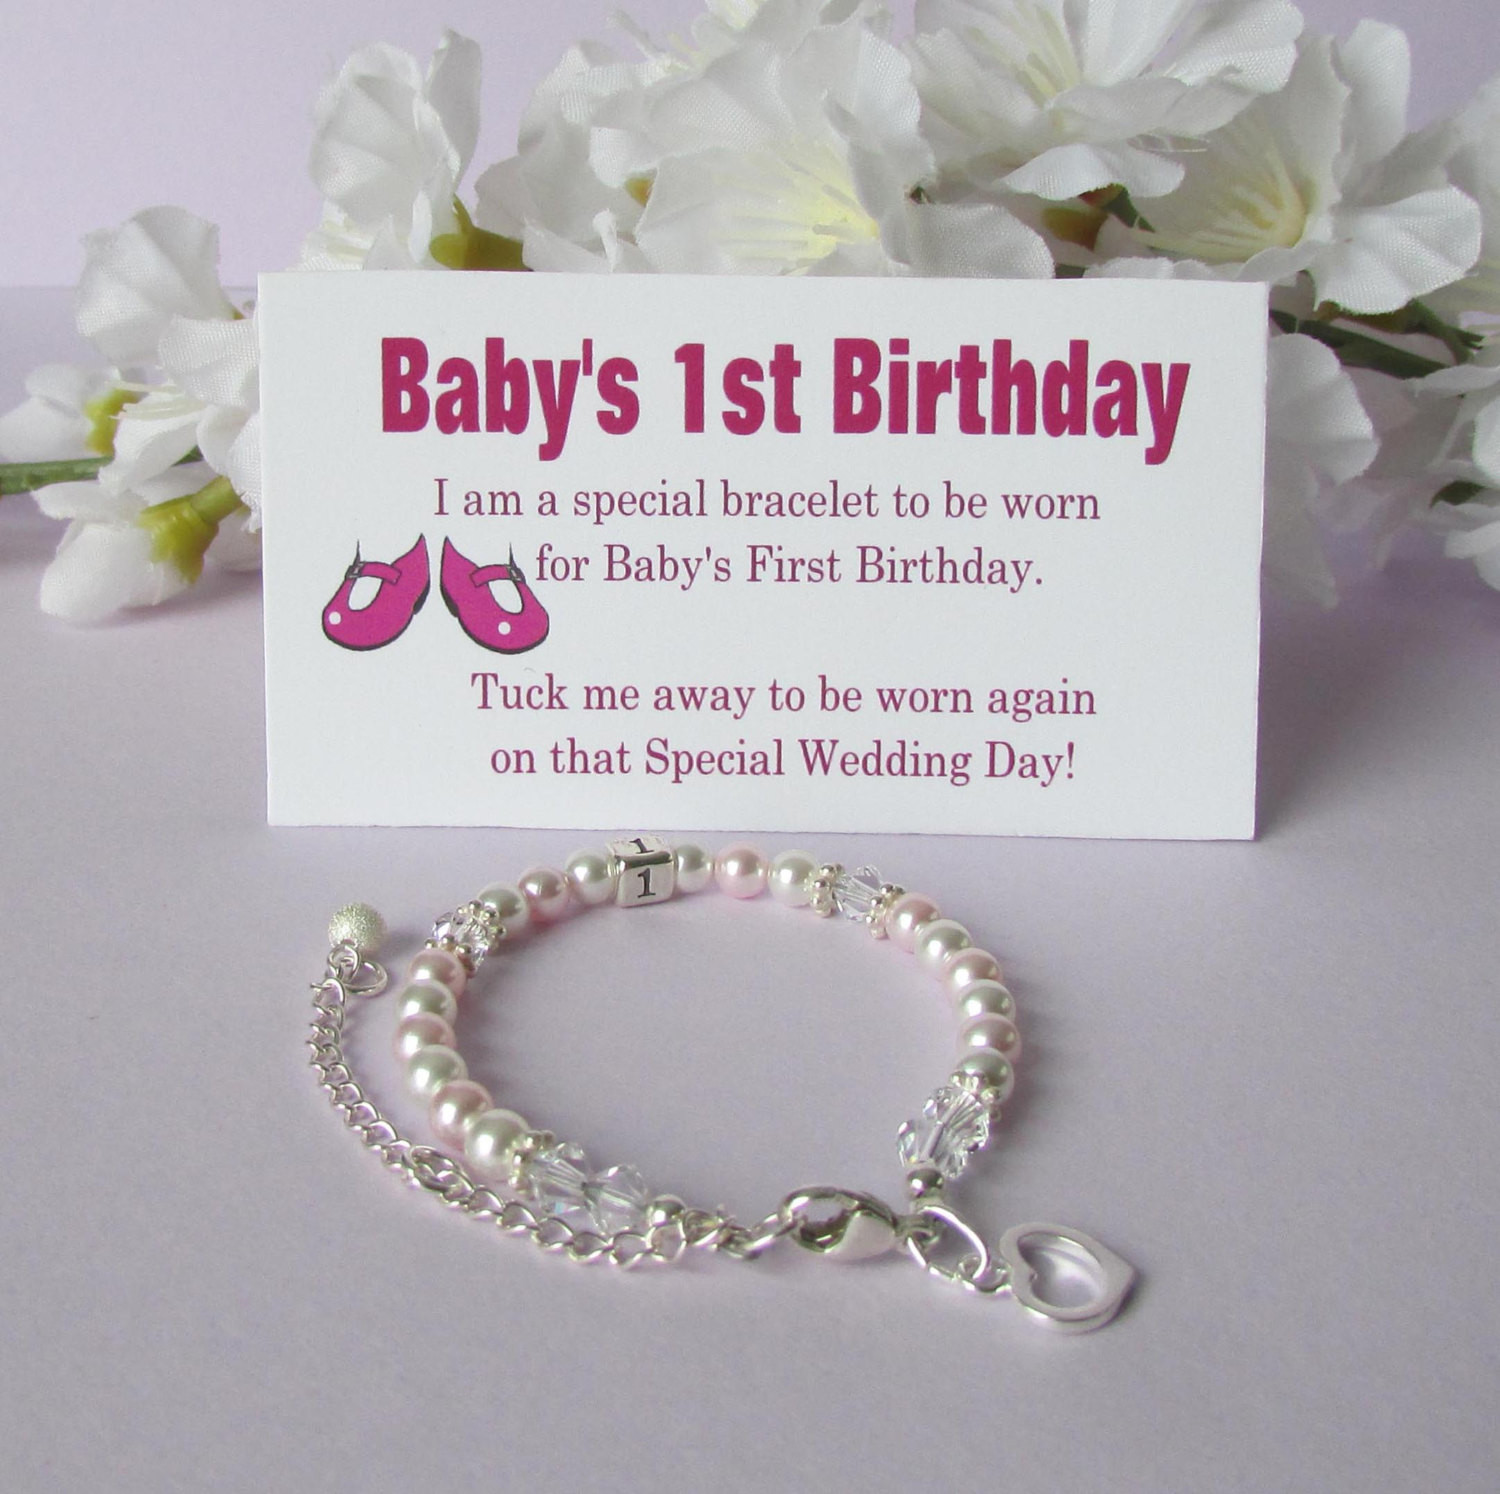 Gifts For First Birthday Girl
 Baby s 1st Birthday Gift Bracelet Baby to Bride Growing